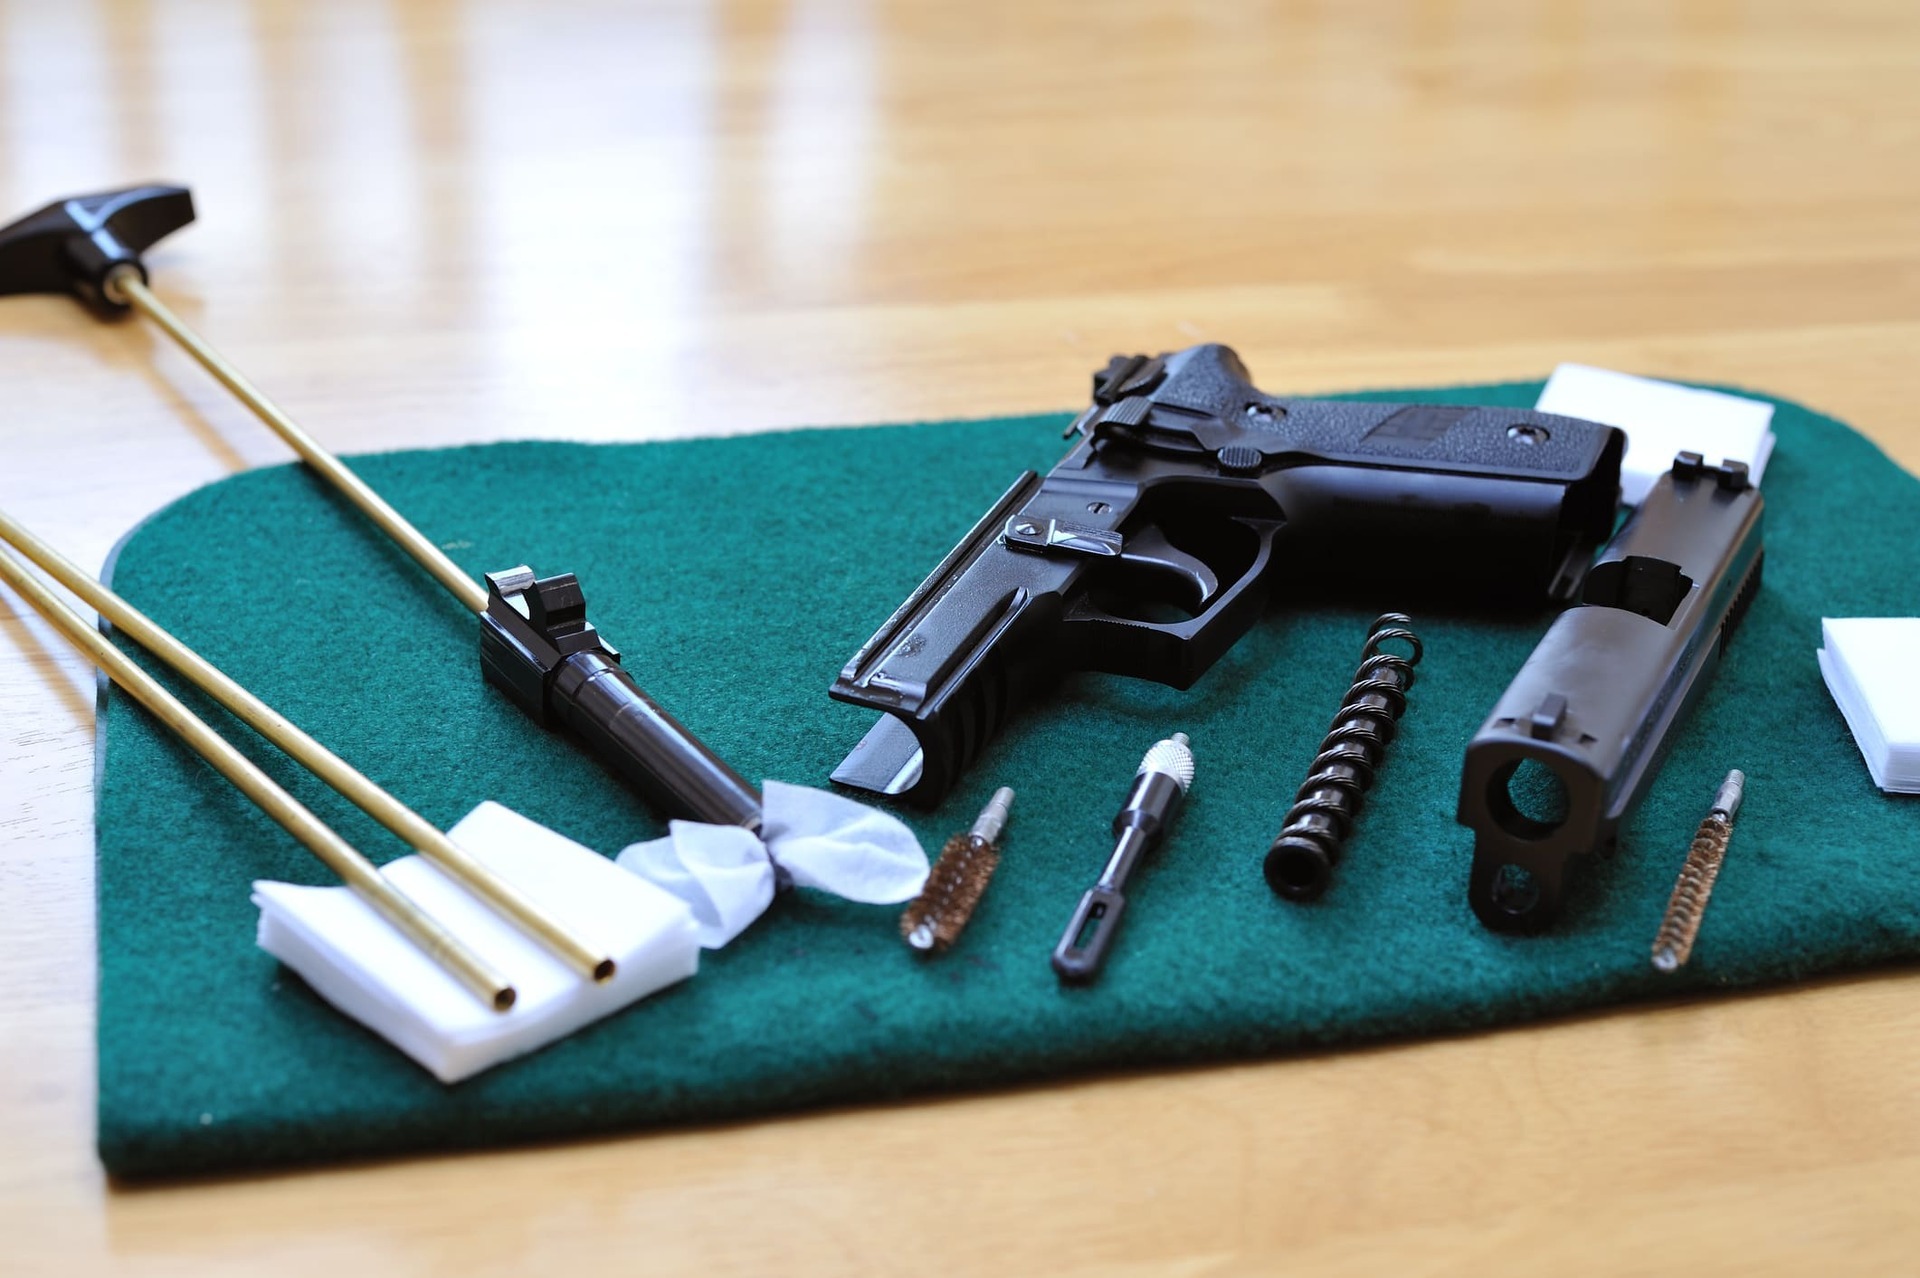 Cleaning a Handgun: How to Maintain Your Firearm Properly